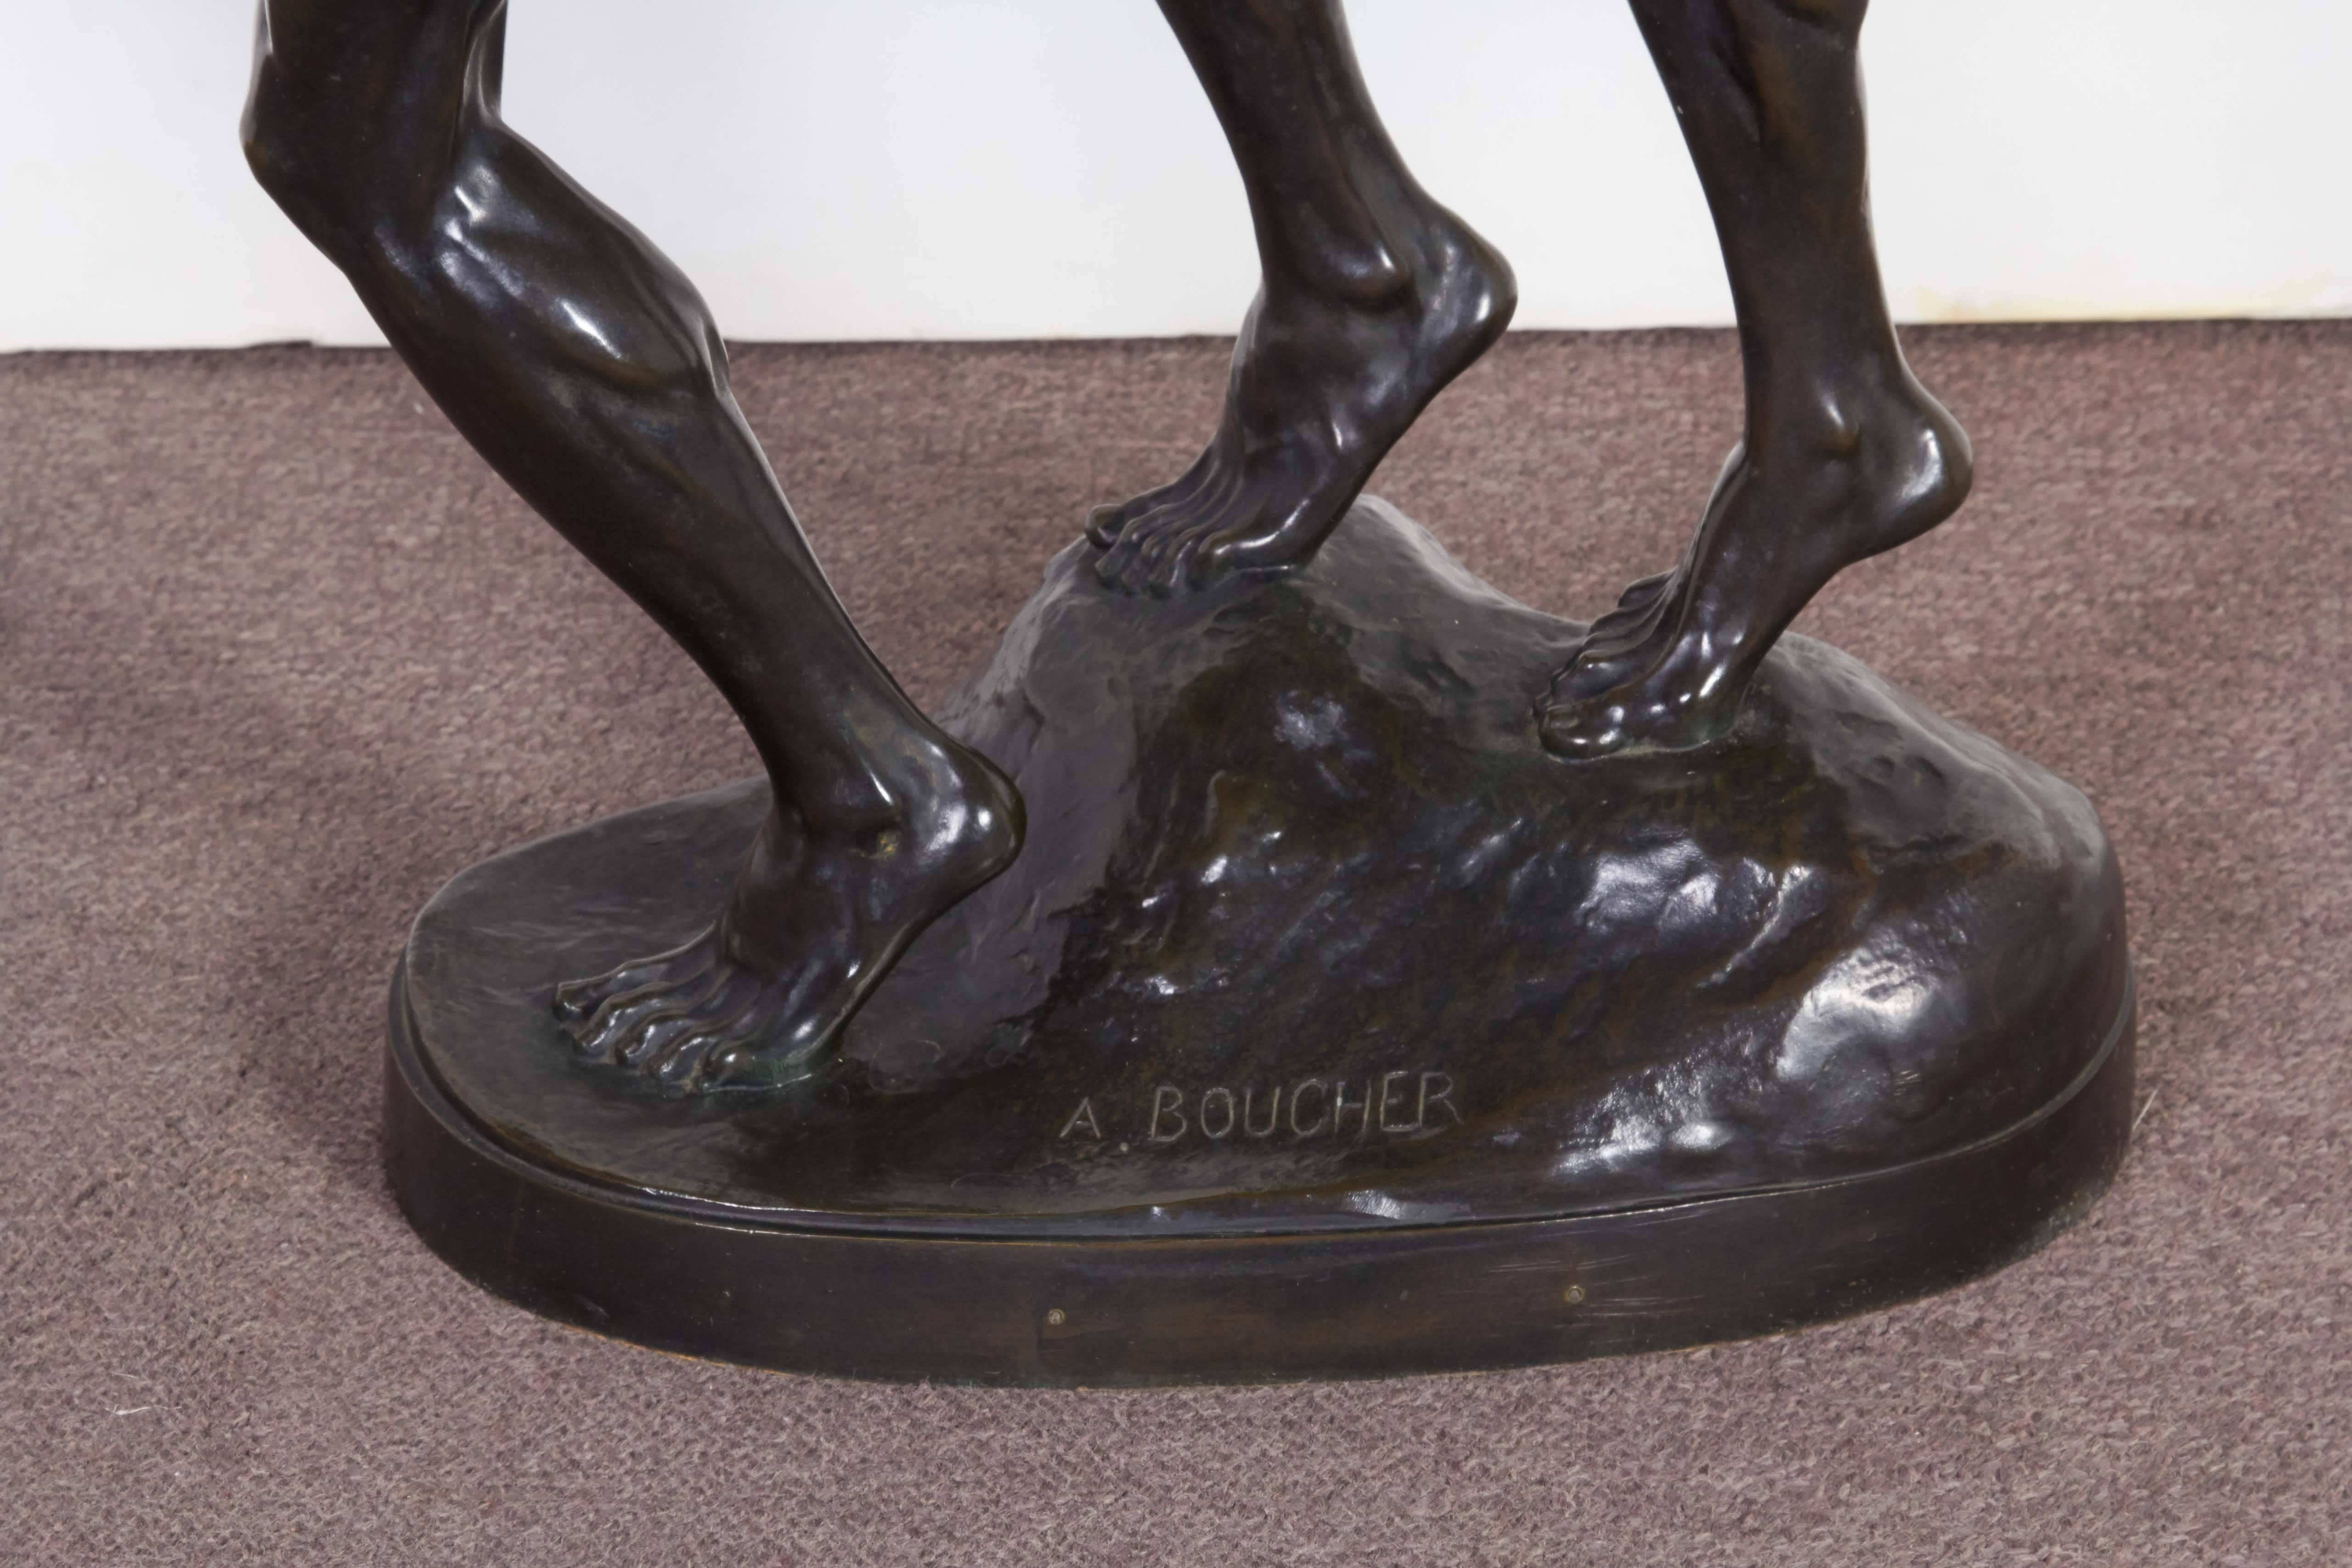 19th Century Large and Important Bronze Sculpture of Three Runners by A. Boucher - Siot